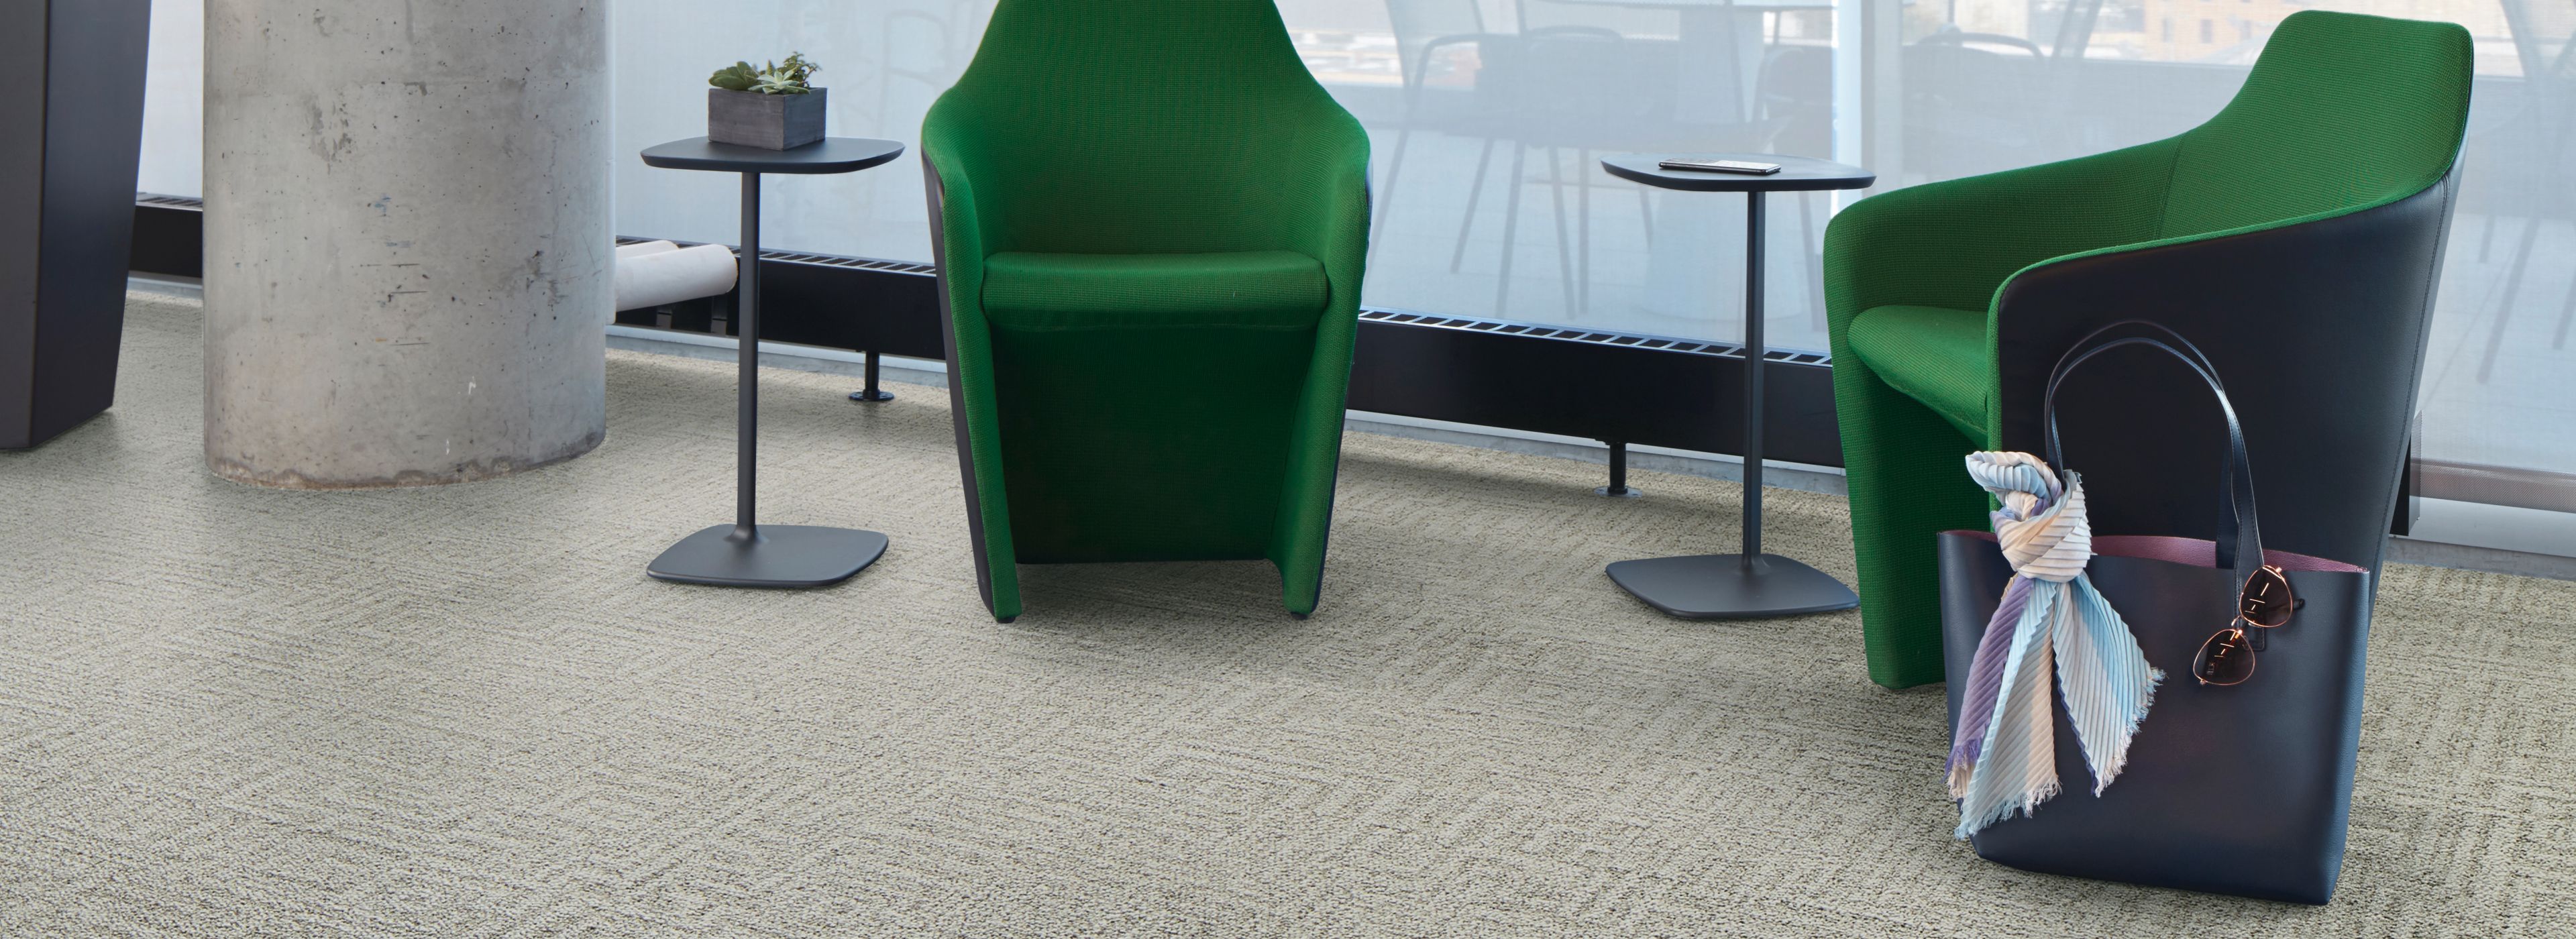 Interface Open Air 413 carpet tile in lounge space with green chairs and cement column imagen número 1